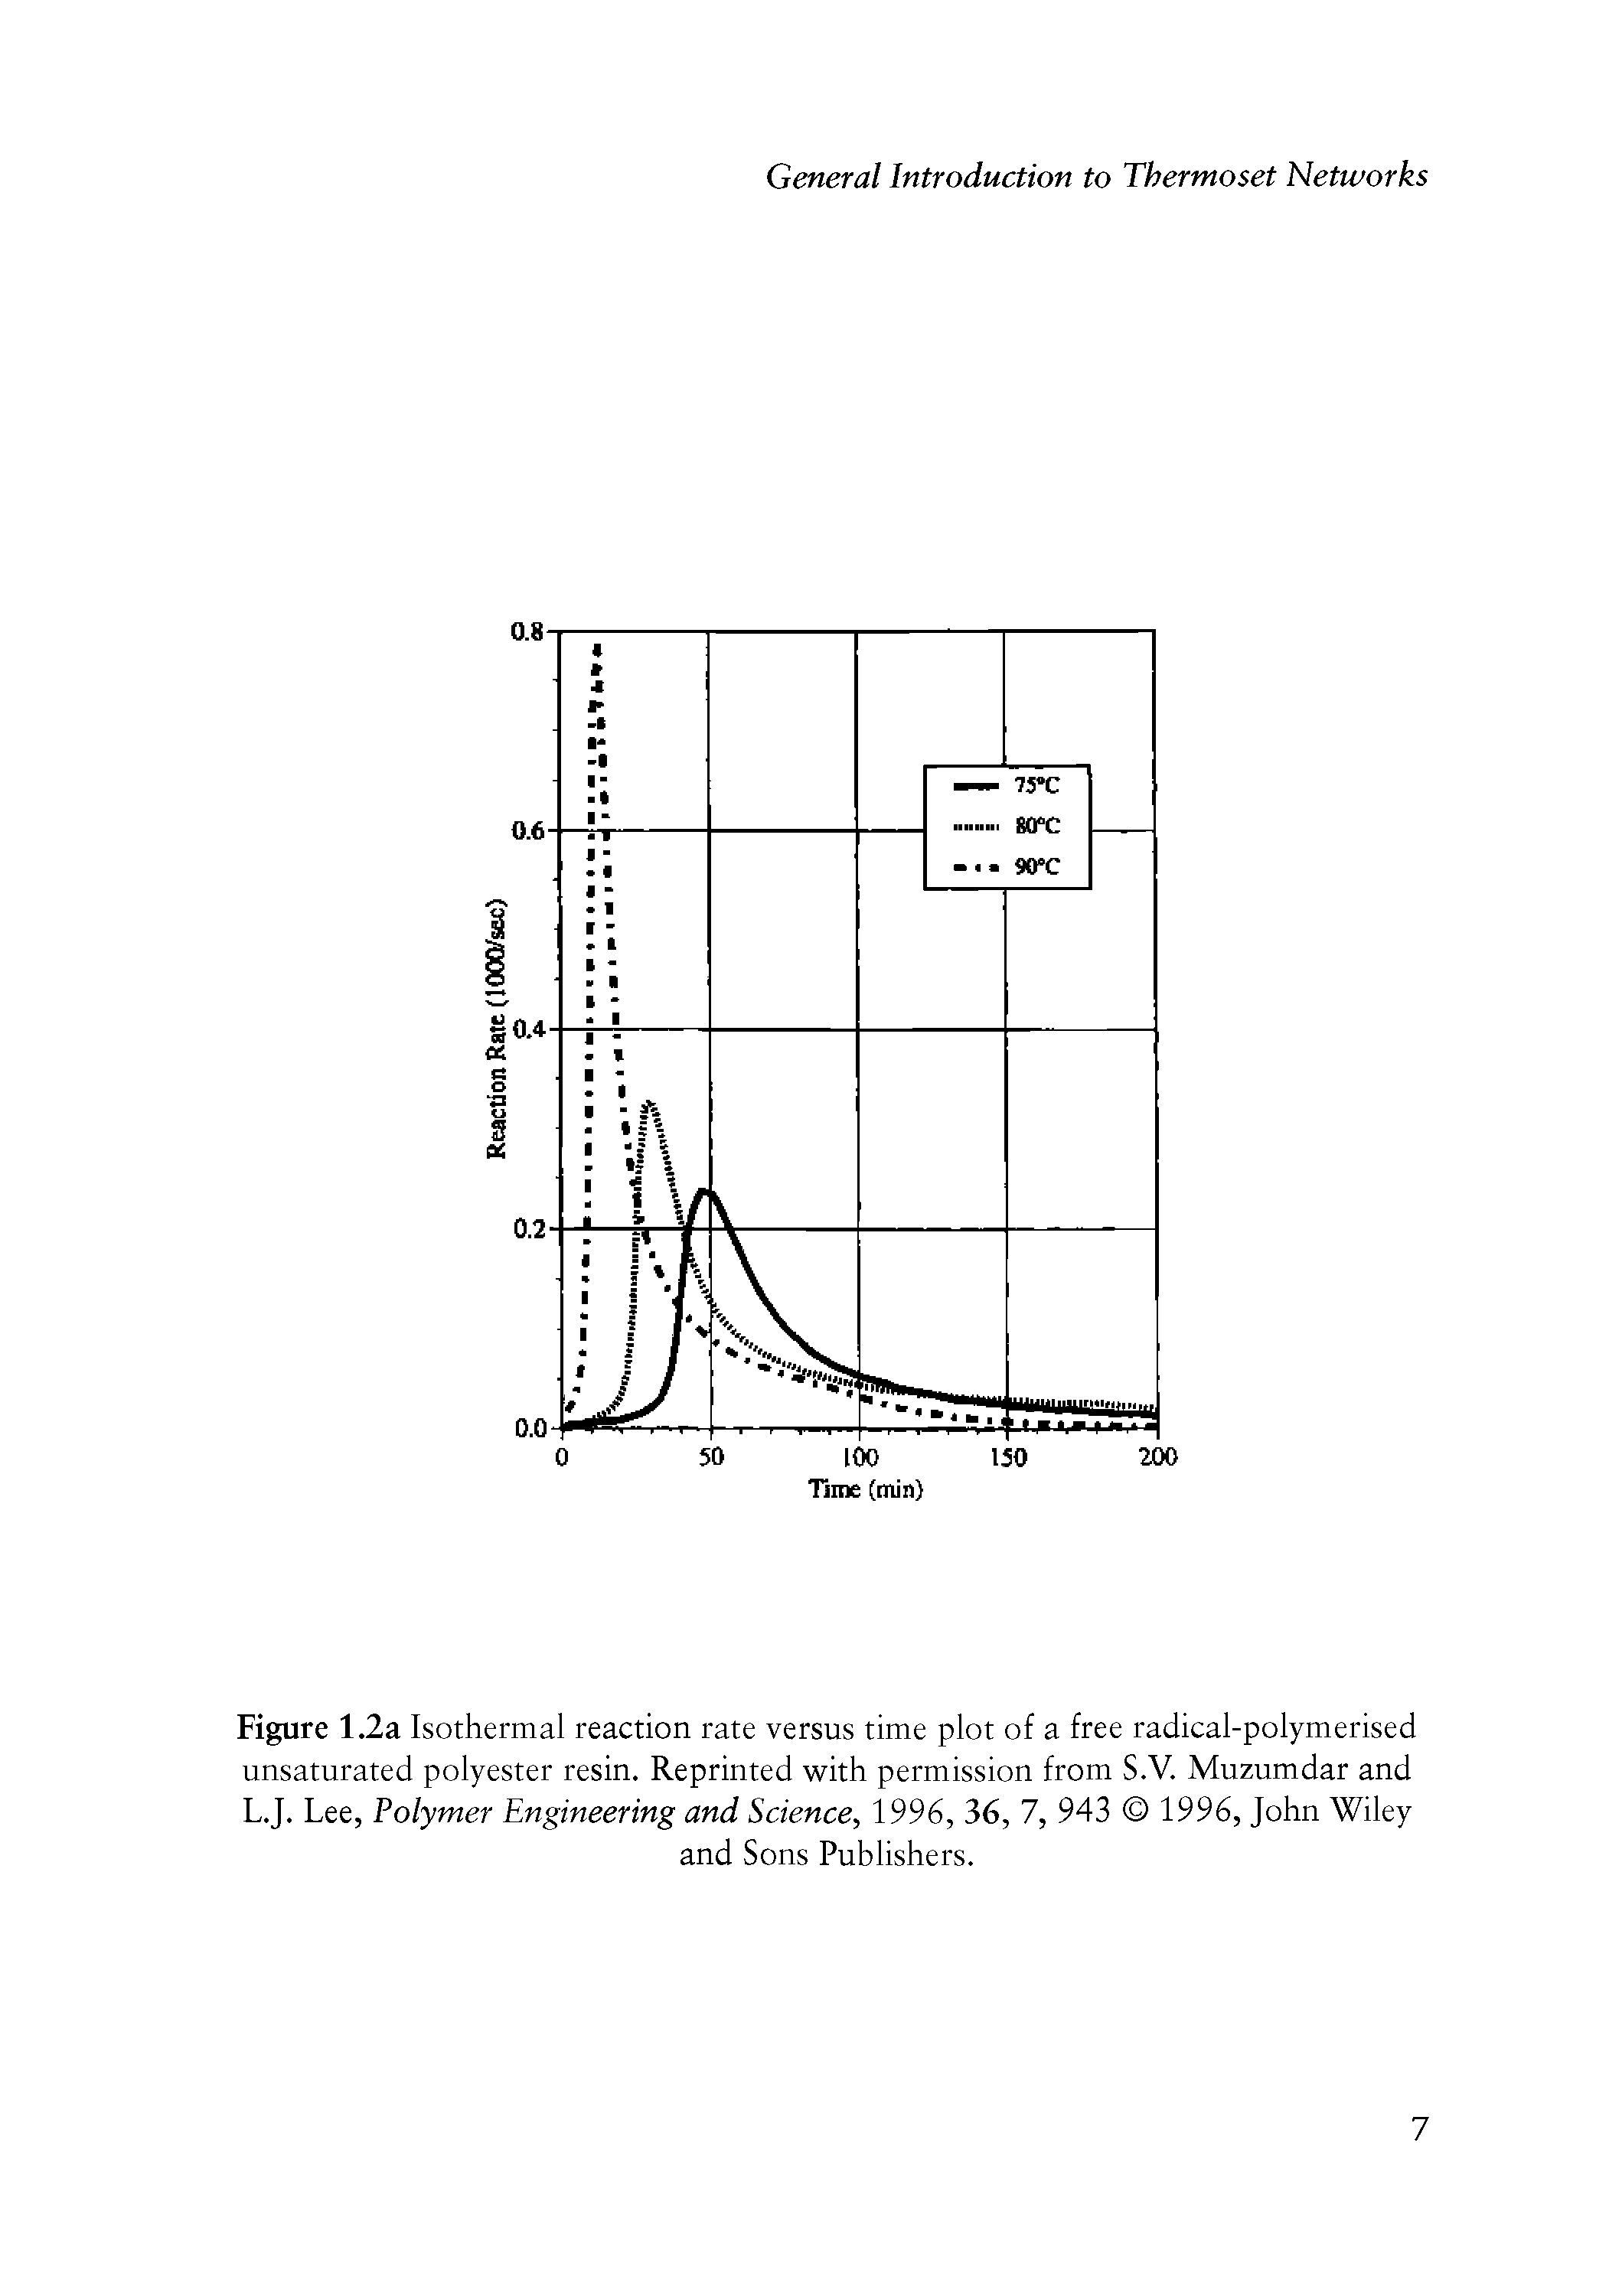 Figure 1.2a Isothermal reaction rate versus time plot of a free radical-polymerised unsaturated polyester resin. Reprinted with permission from S.V. Muzumdar and L.J. Lee, Polymer Engineering and Science, 1996, 36, 7, 943 1996, John Wiley...